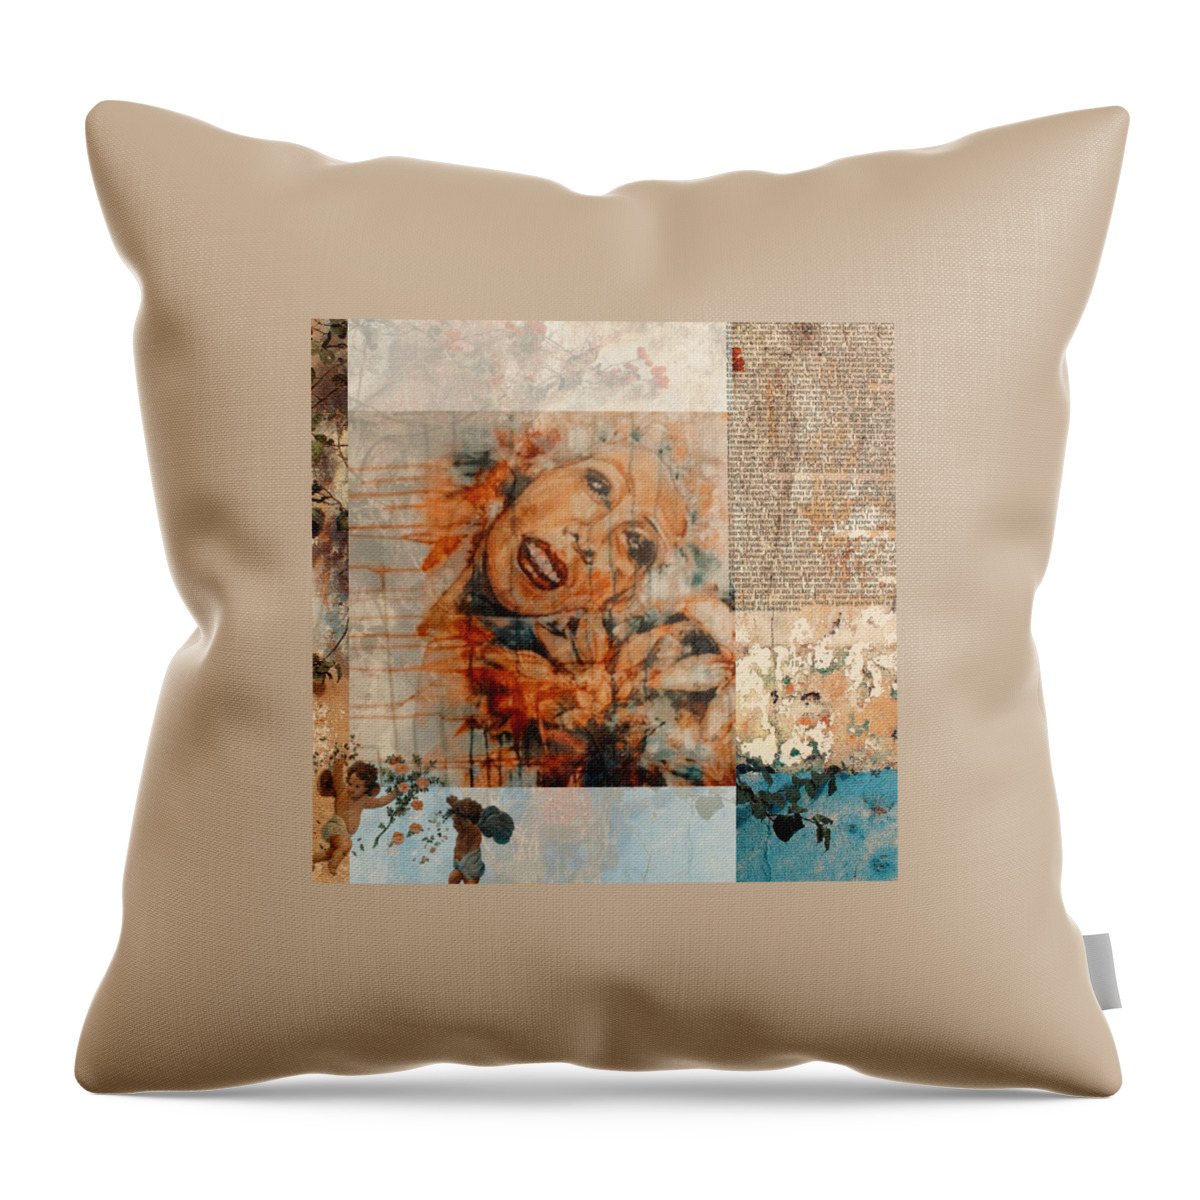  Throw Pillow featuring the painting Read All About It by Try Cheatham